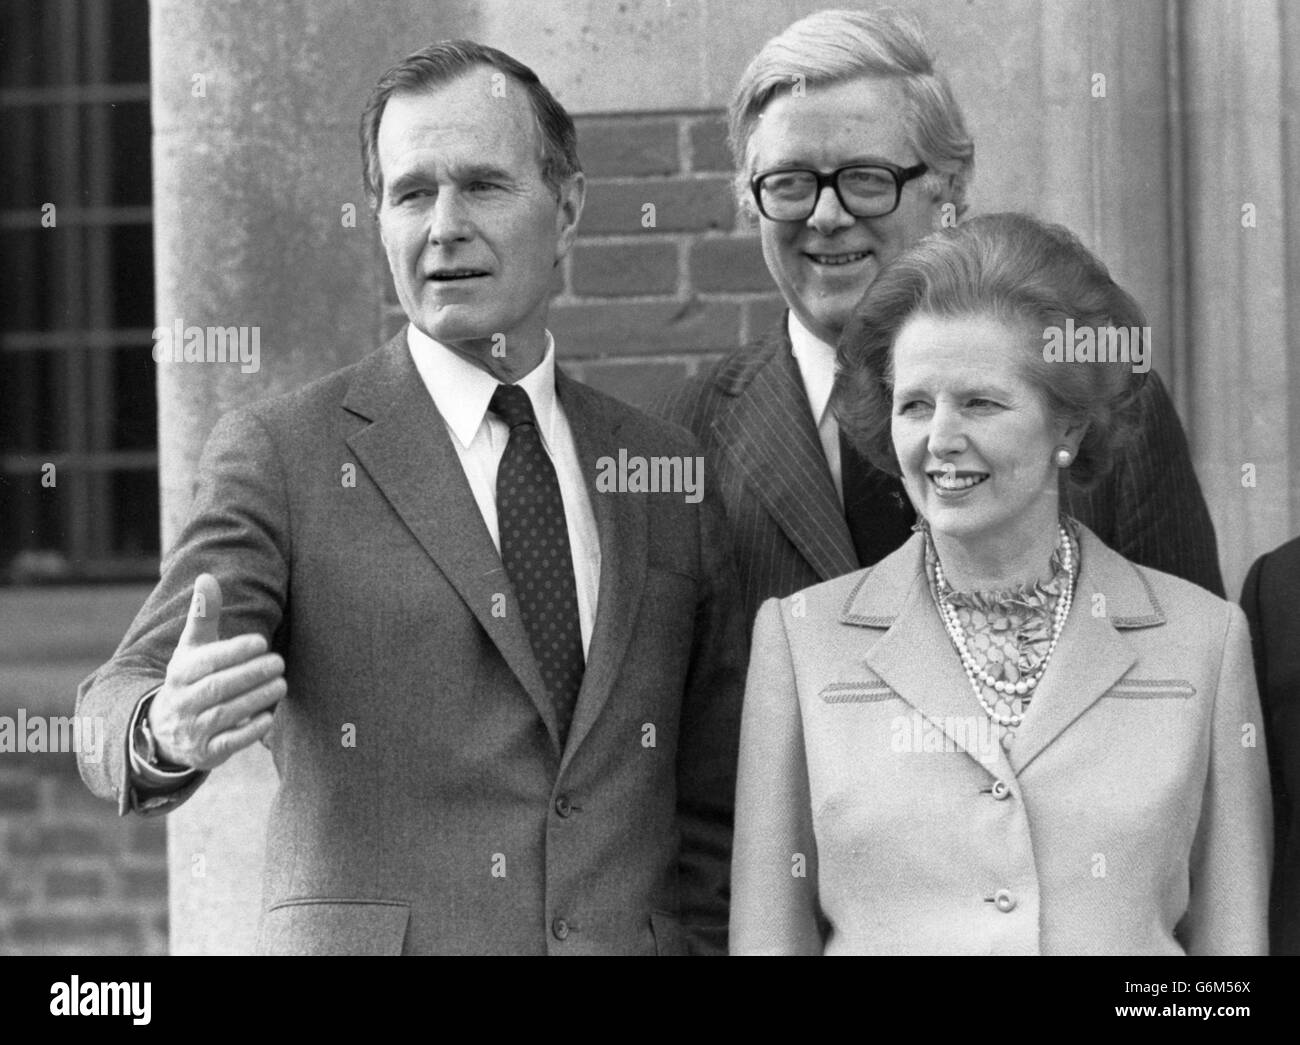 George Bush, Vice-President of the United States (left), with Prime Minister Margaret Thatcher and Foreign Secretary Sir Geoffrey Howe. *Low res scan - hi-res version available on request* Stock Photo